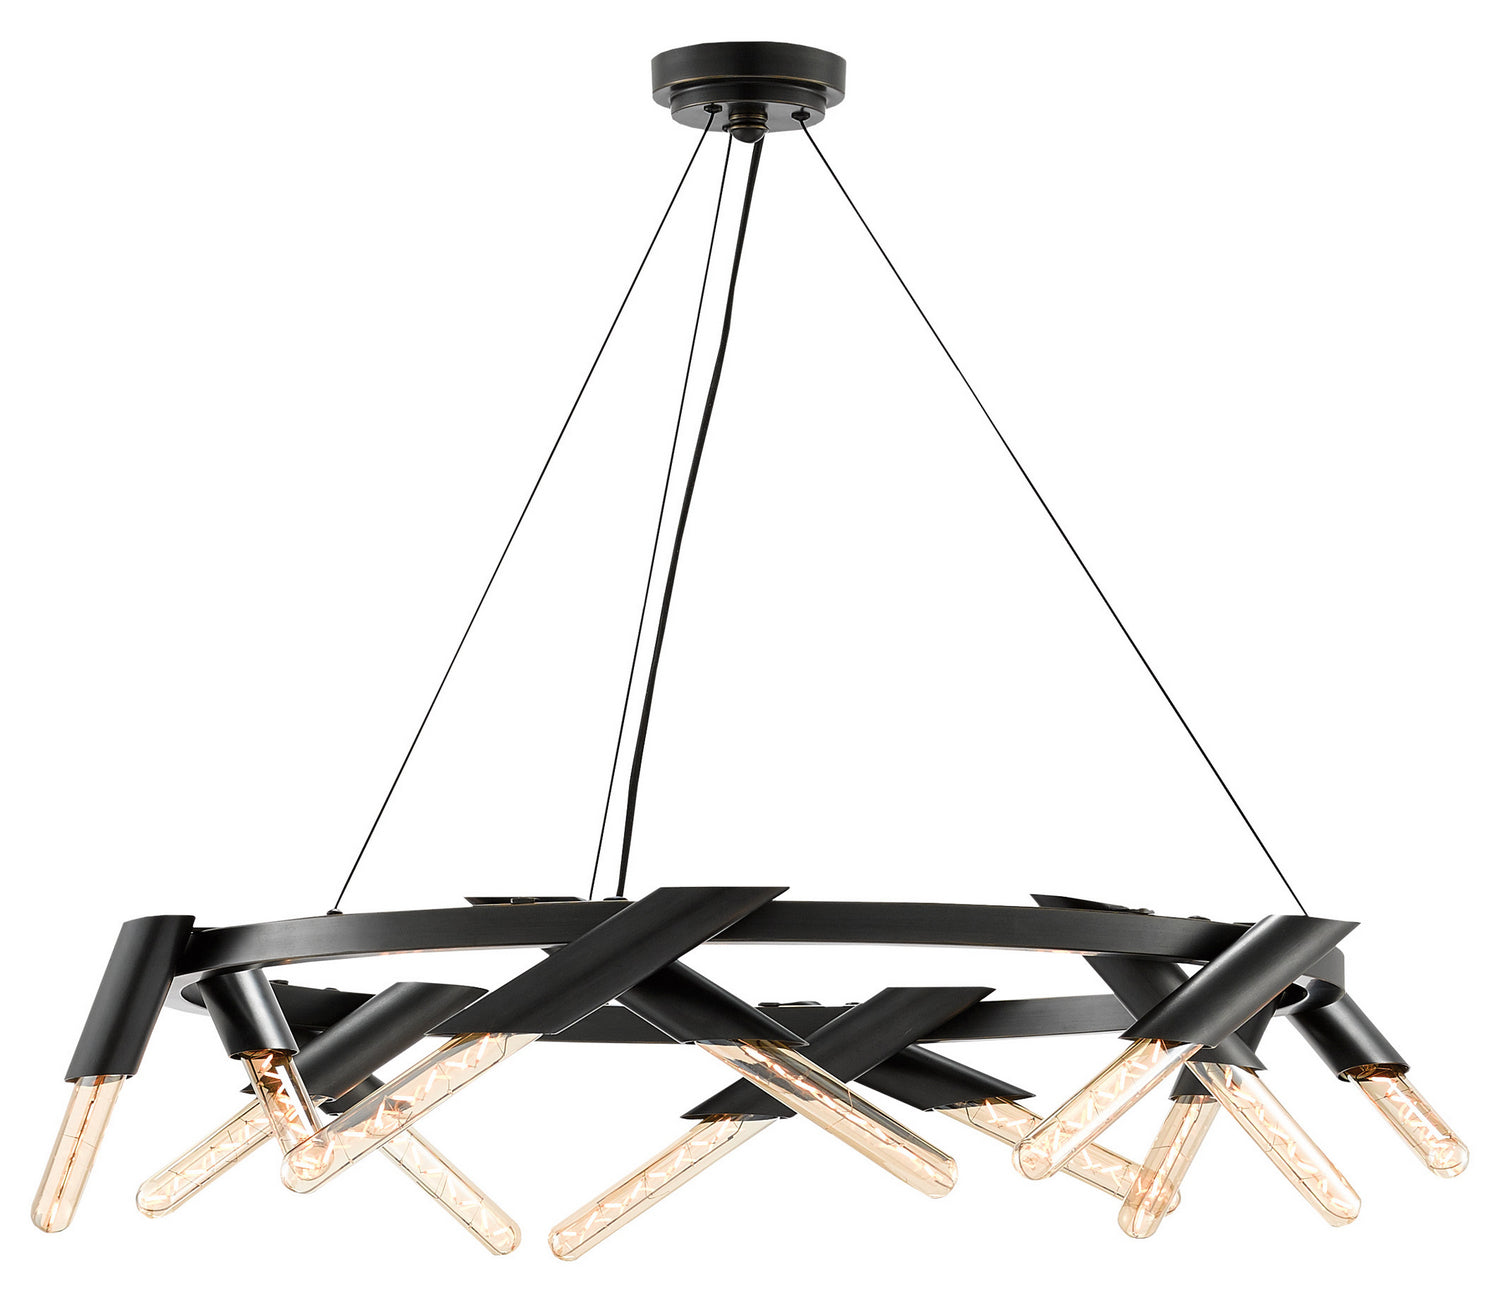 12 Light Chandelier from the Luciole collection in Oil Rubbed Bronze finish